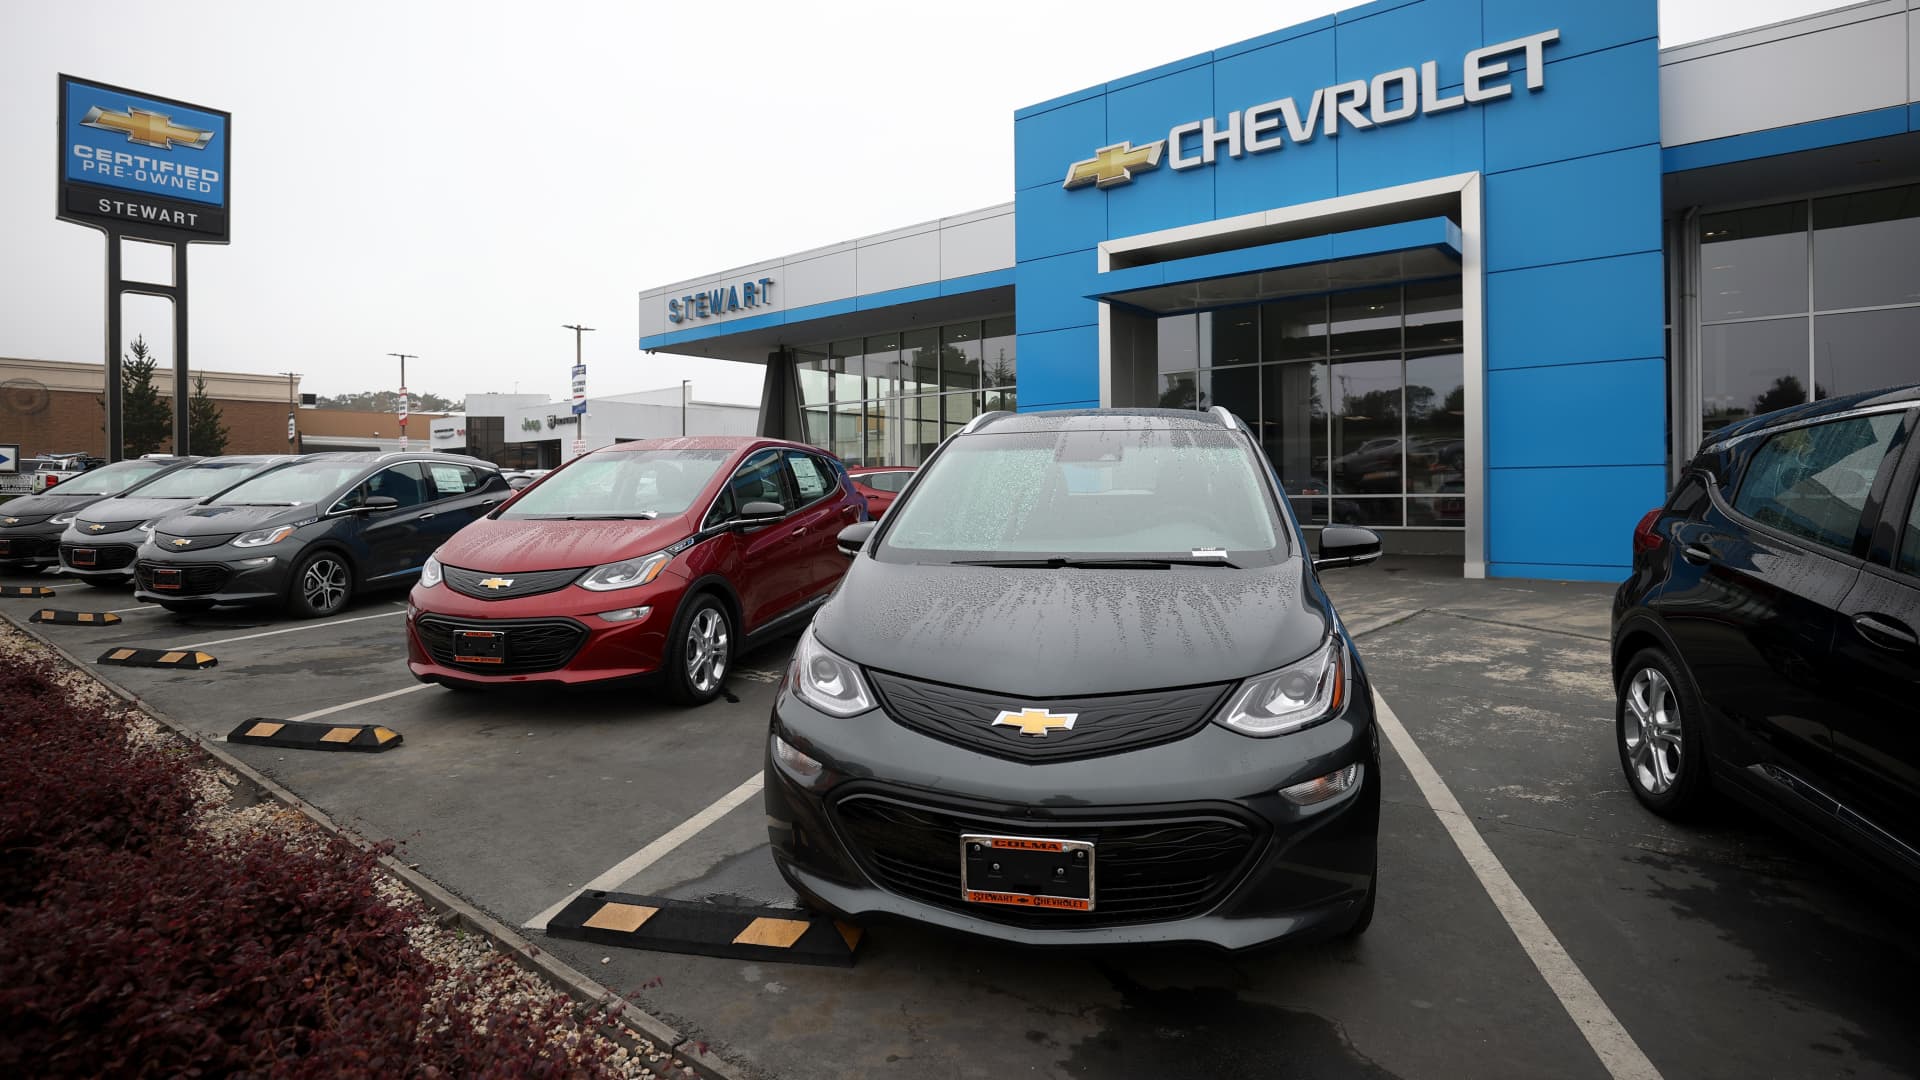 Brand new Chevrolet cars are displayed on the sales lot at Stewart Chevrolet on May 14, 2021 in Colma, California.